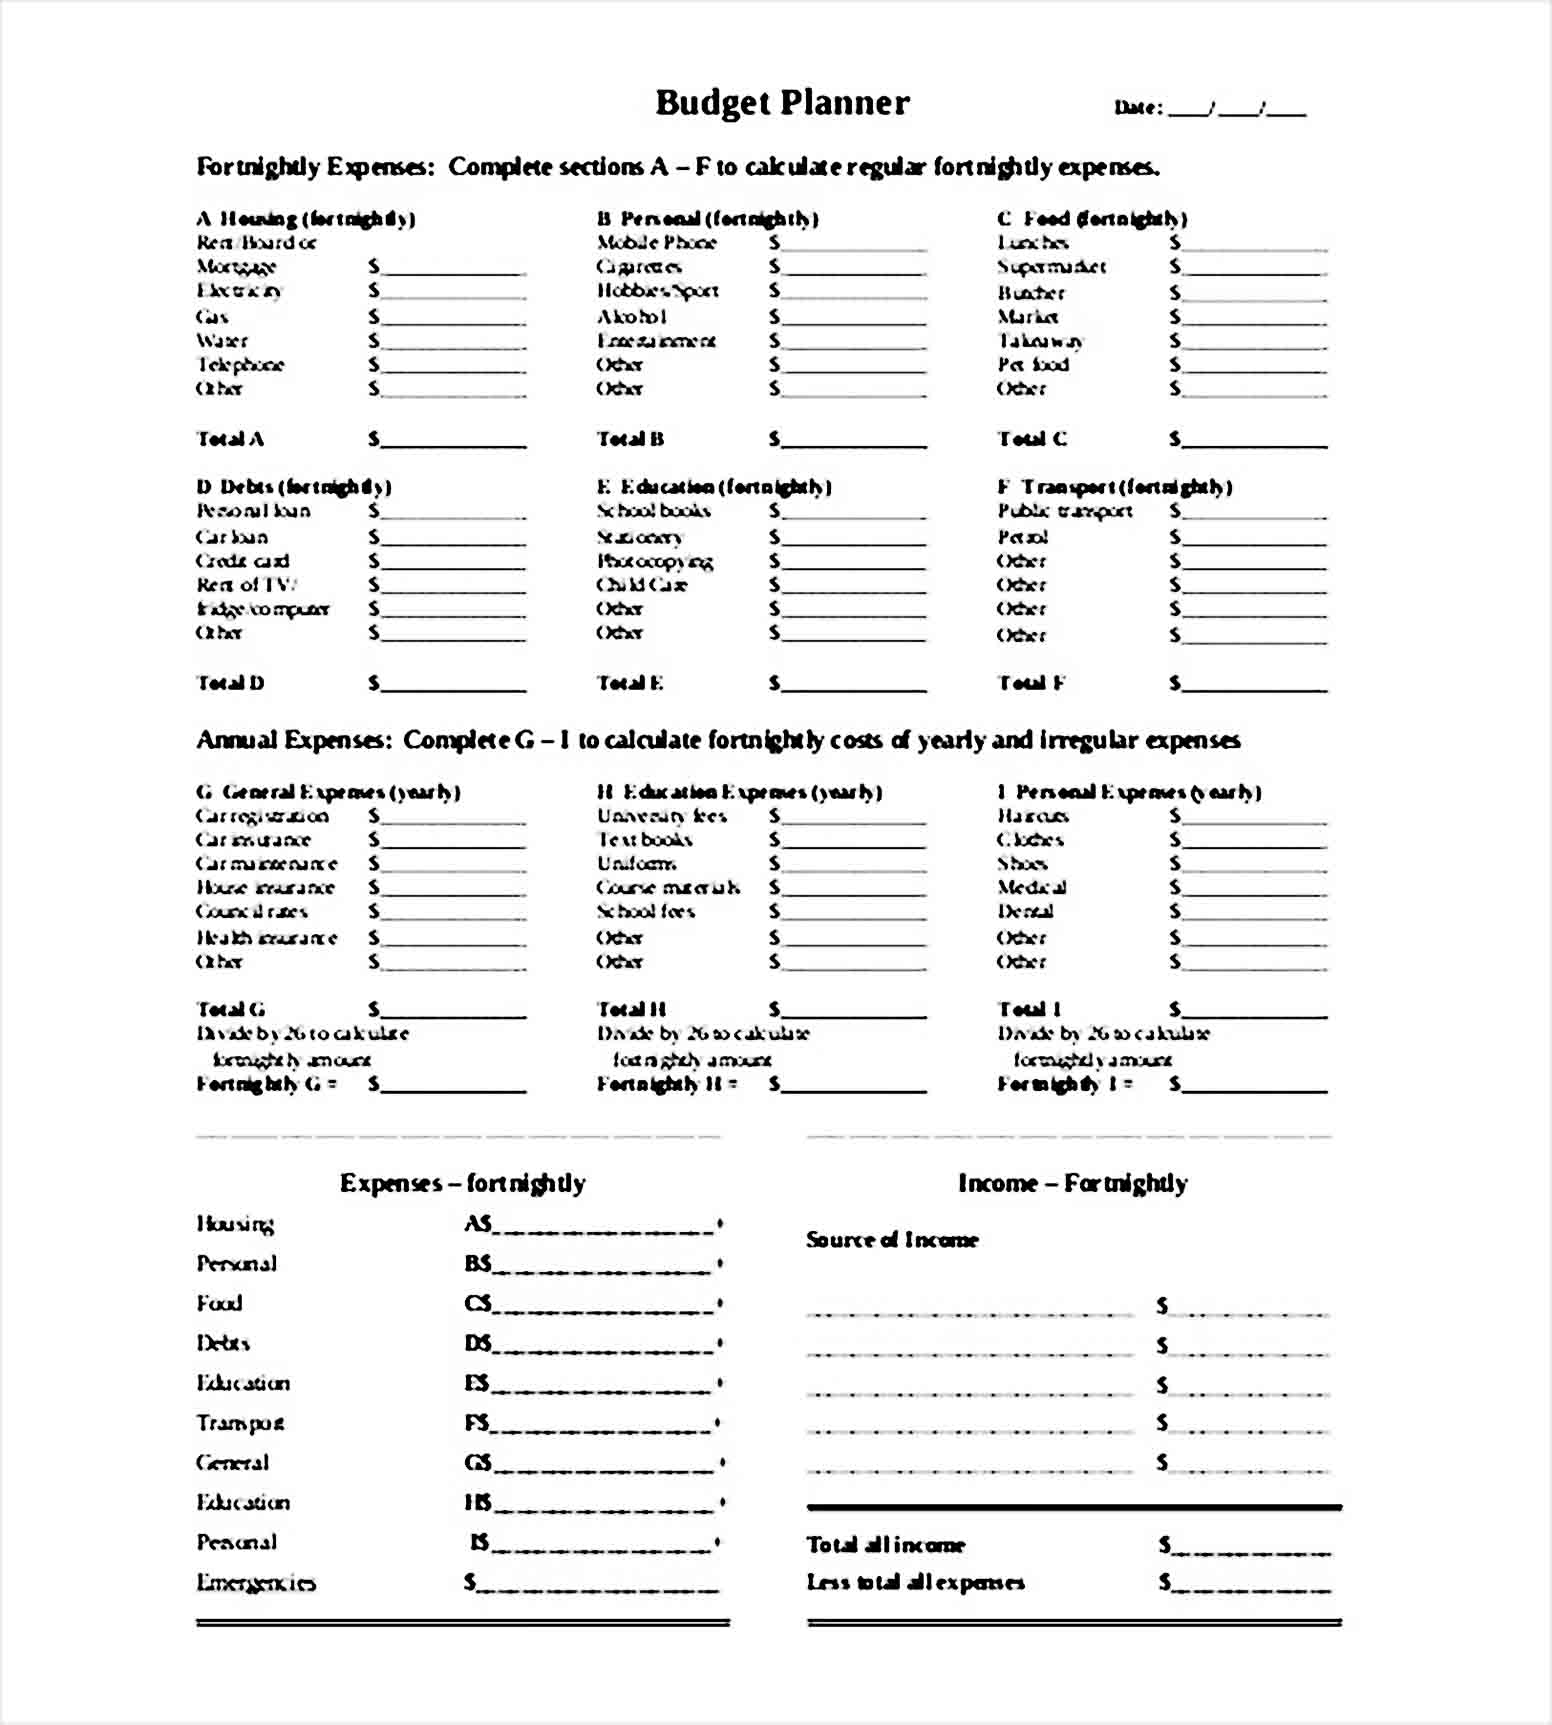 Budget Planner Template Download1